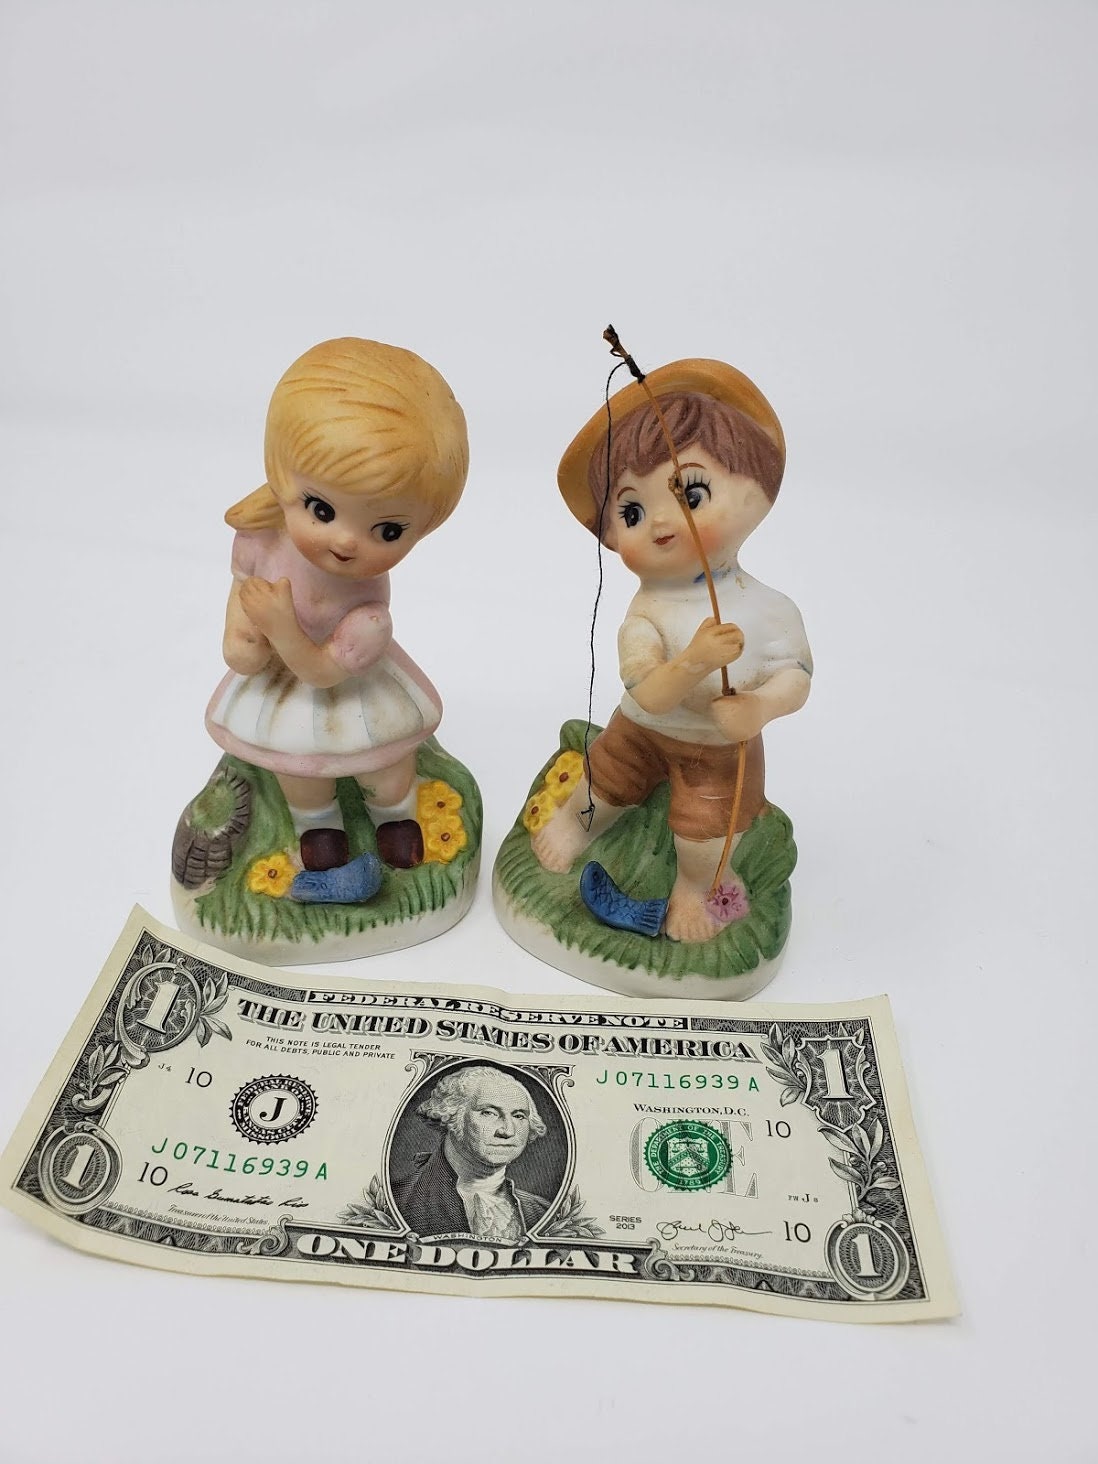 Vintage Pair of Made in Korea Fishing Girl & Boy Bisque Porcelain Figurines  